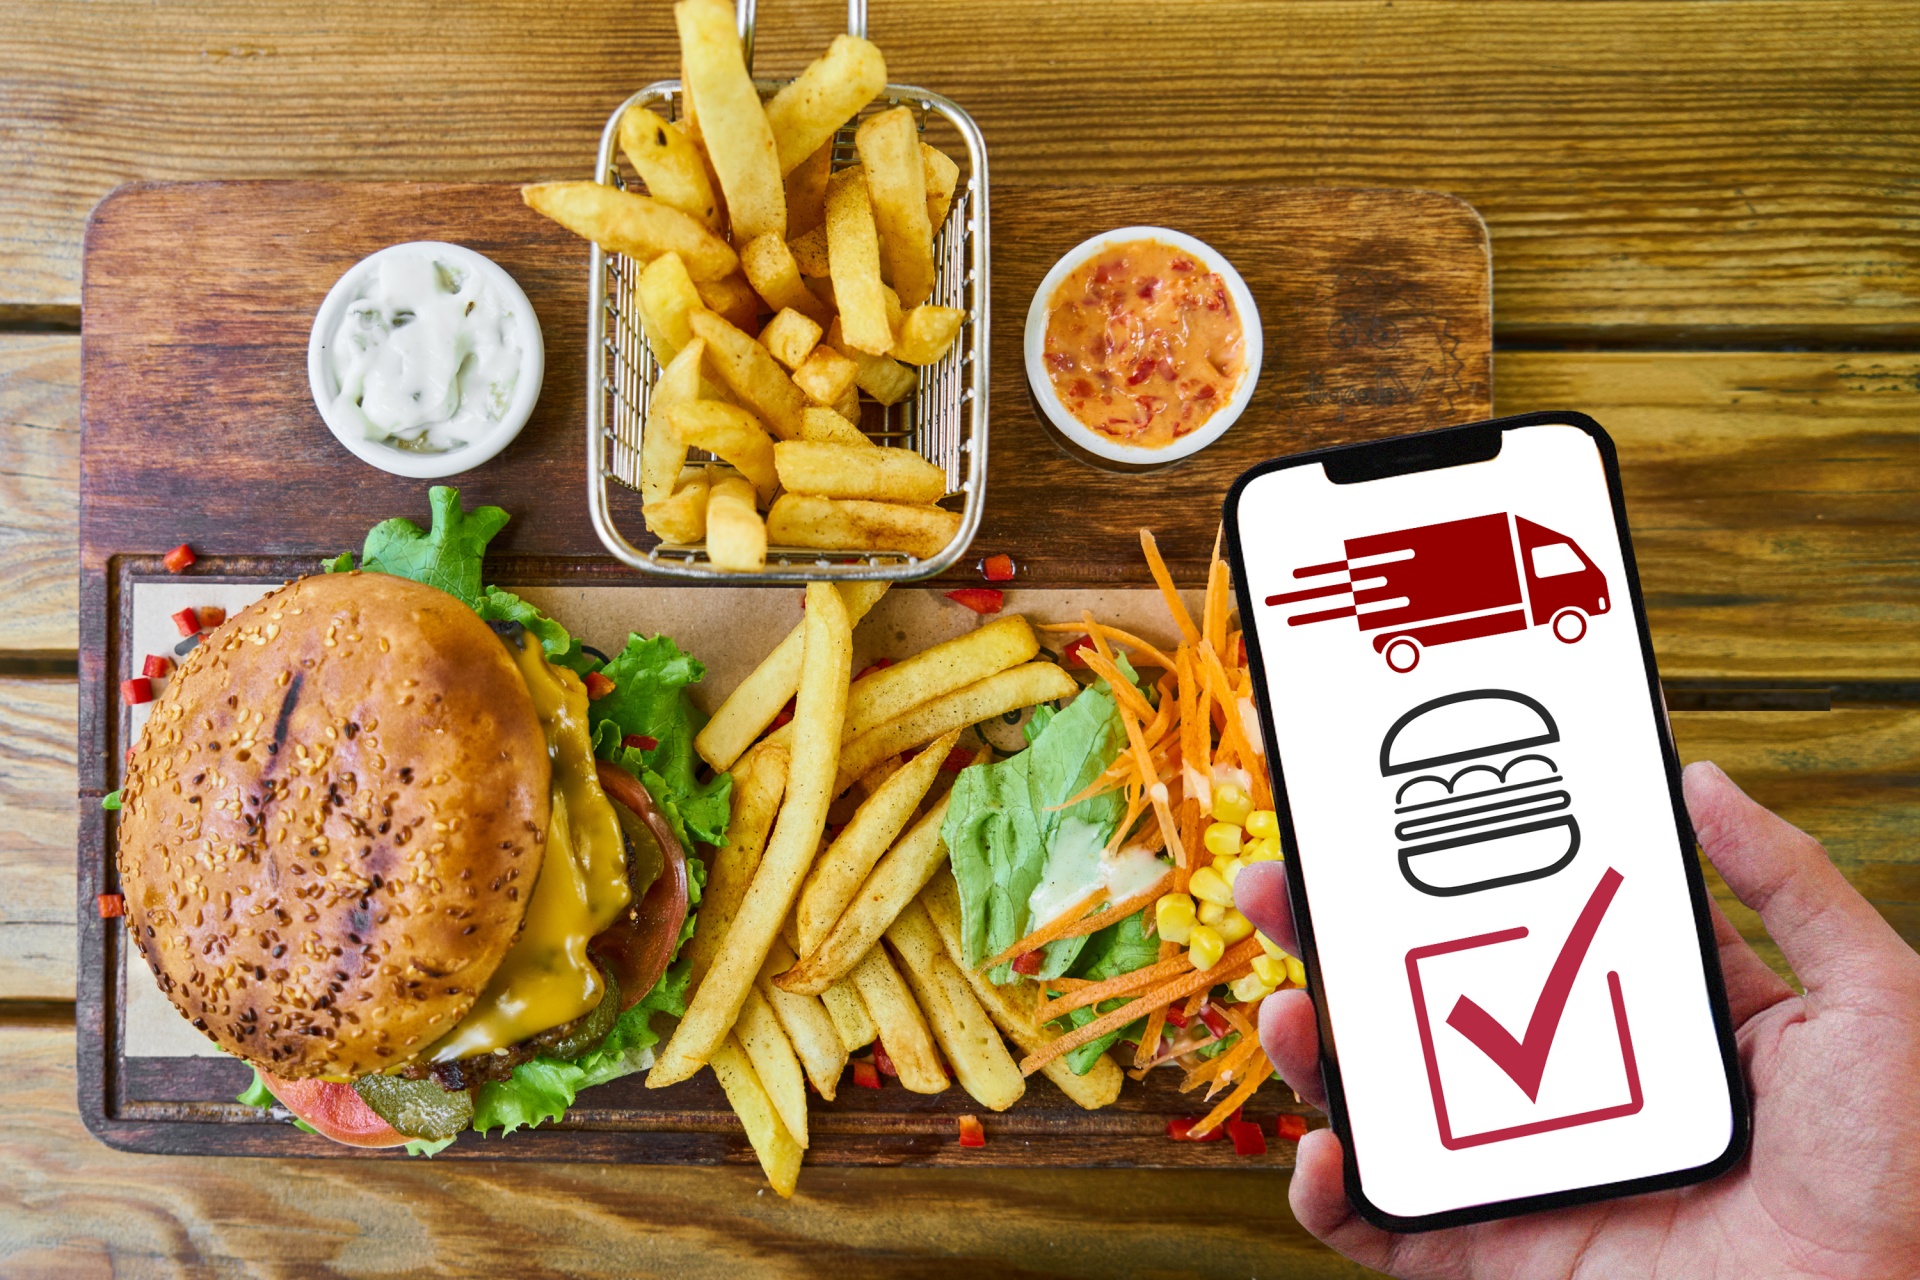 fast food ordering, delivery, online, service, hamburger delivery, via the Internet, services, fast food restaurant, ordering food via the Internet, food, food, fast food, smartphone, app,